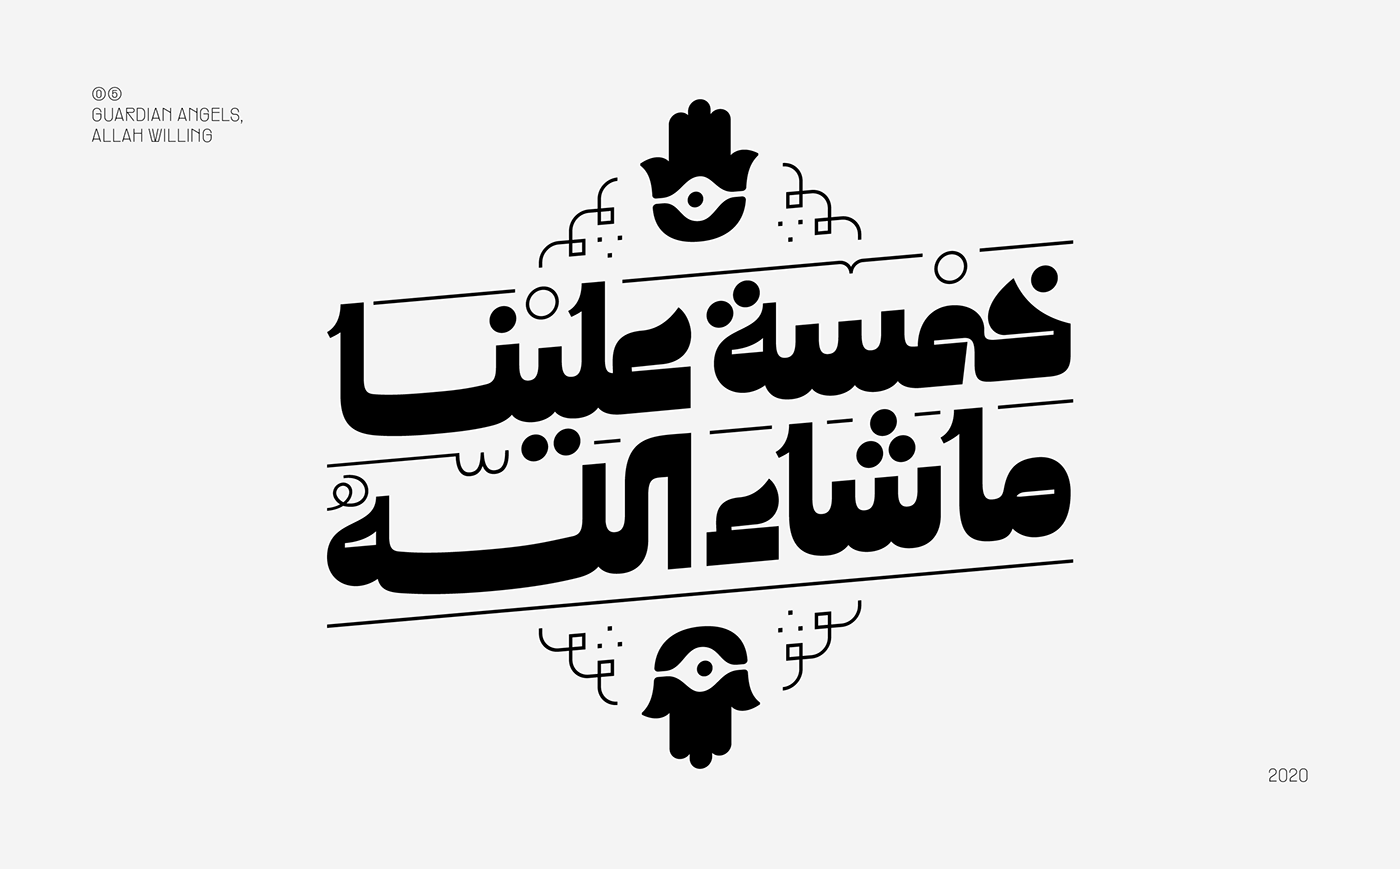 arabic arabic typography arabictype   Calligraphy   font lettering type type design Typeface typography  